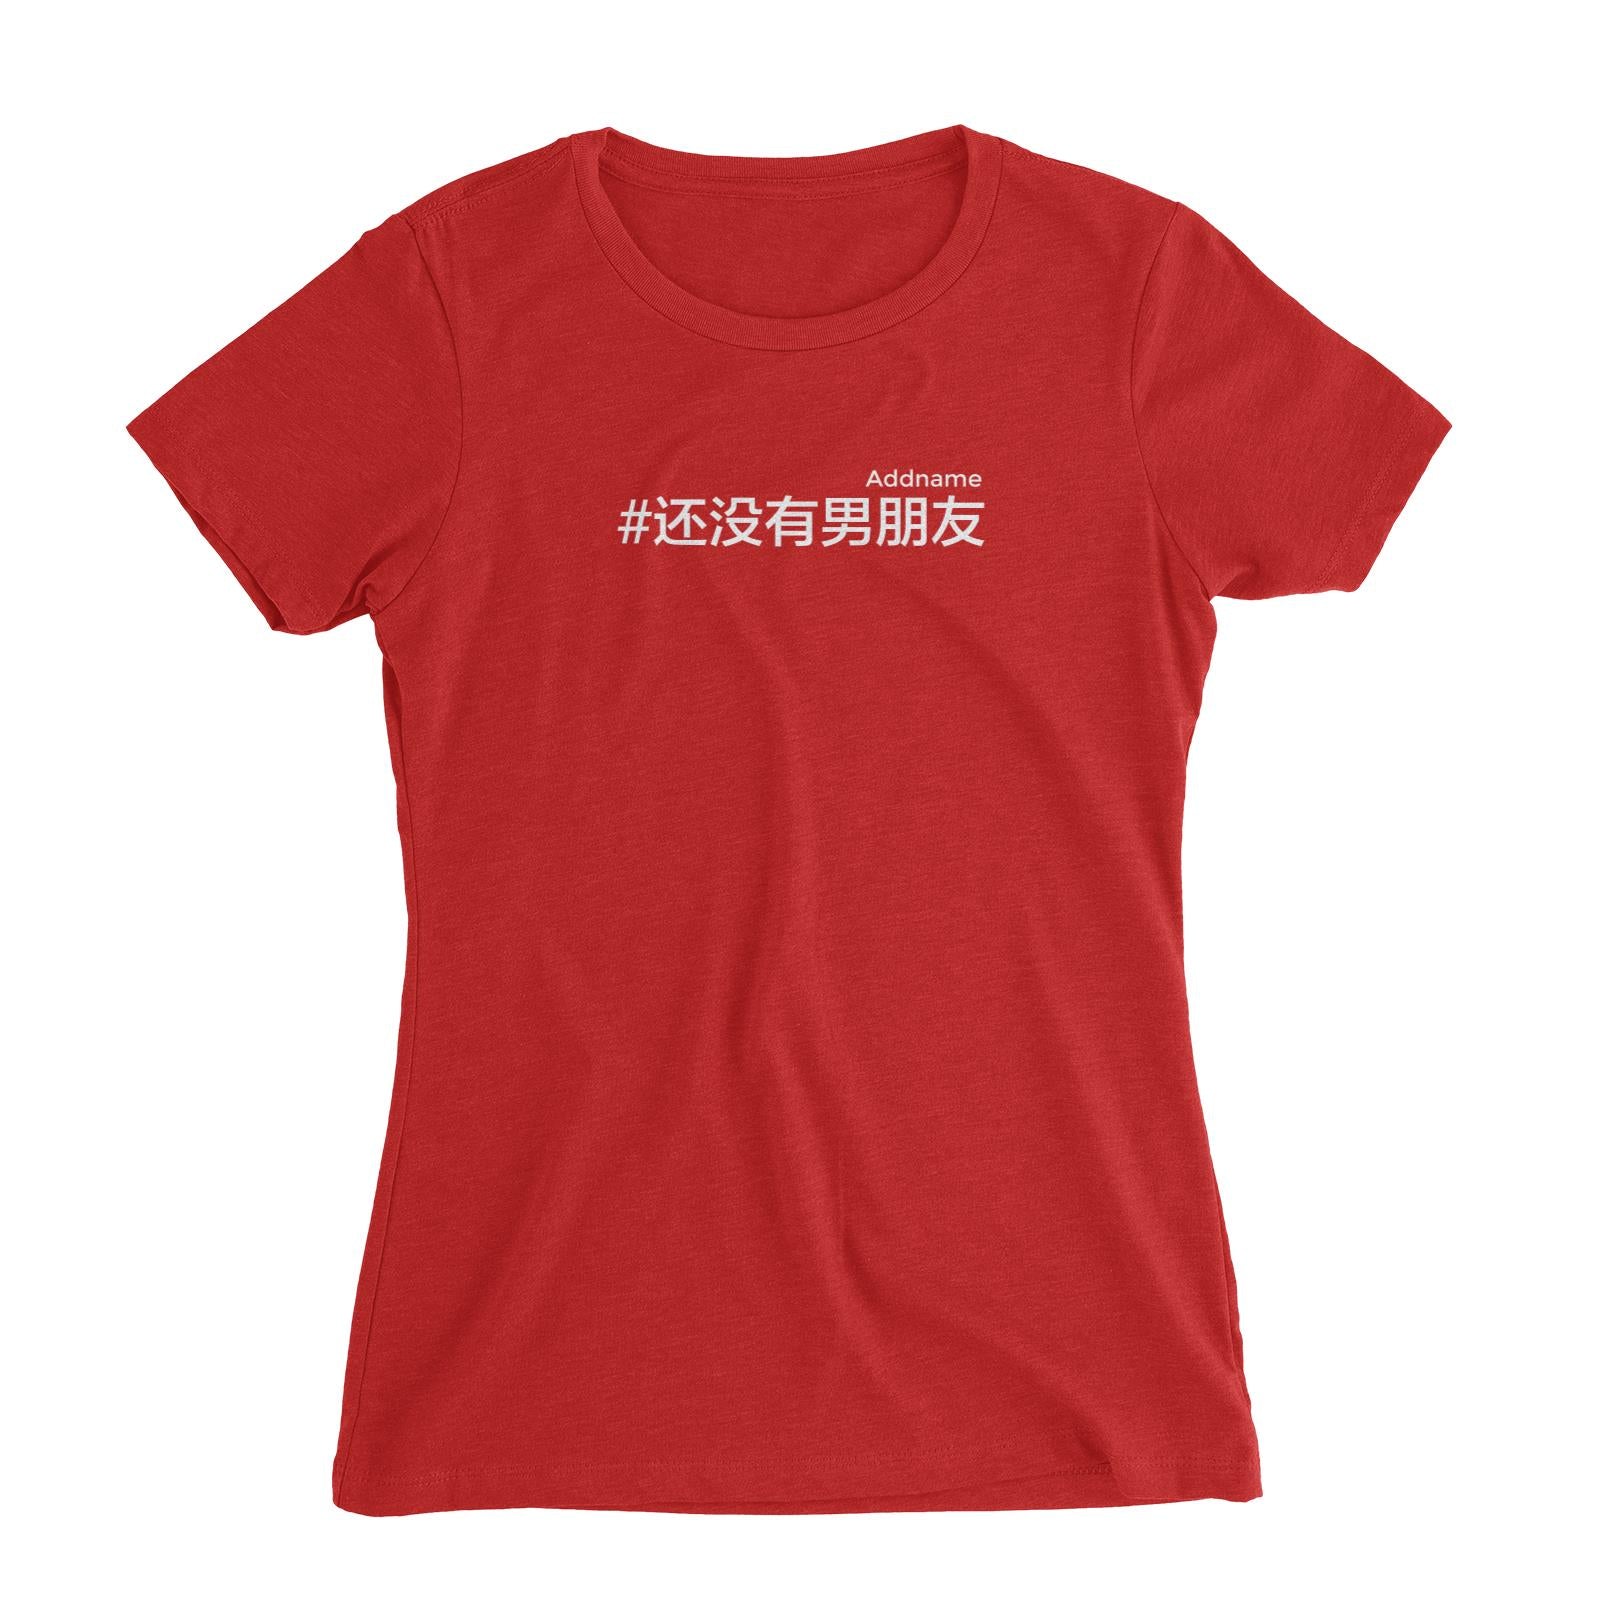 Chinese New Year Hashtag Still no Boyfriend Women's Slim Fit T-Shirt  Personalizable Designs Funny